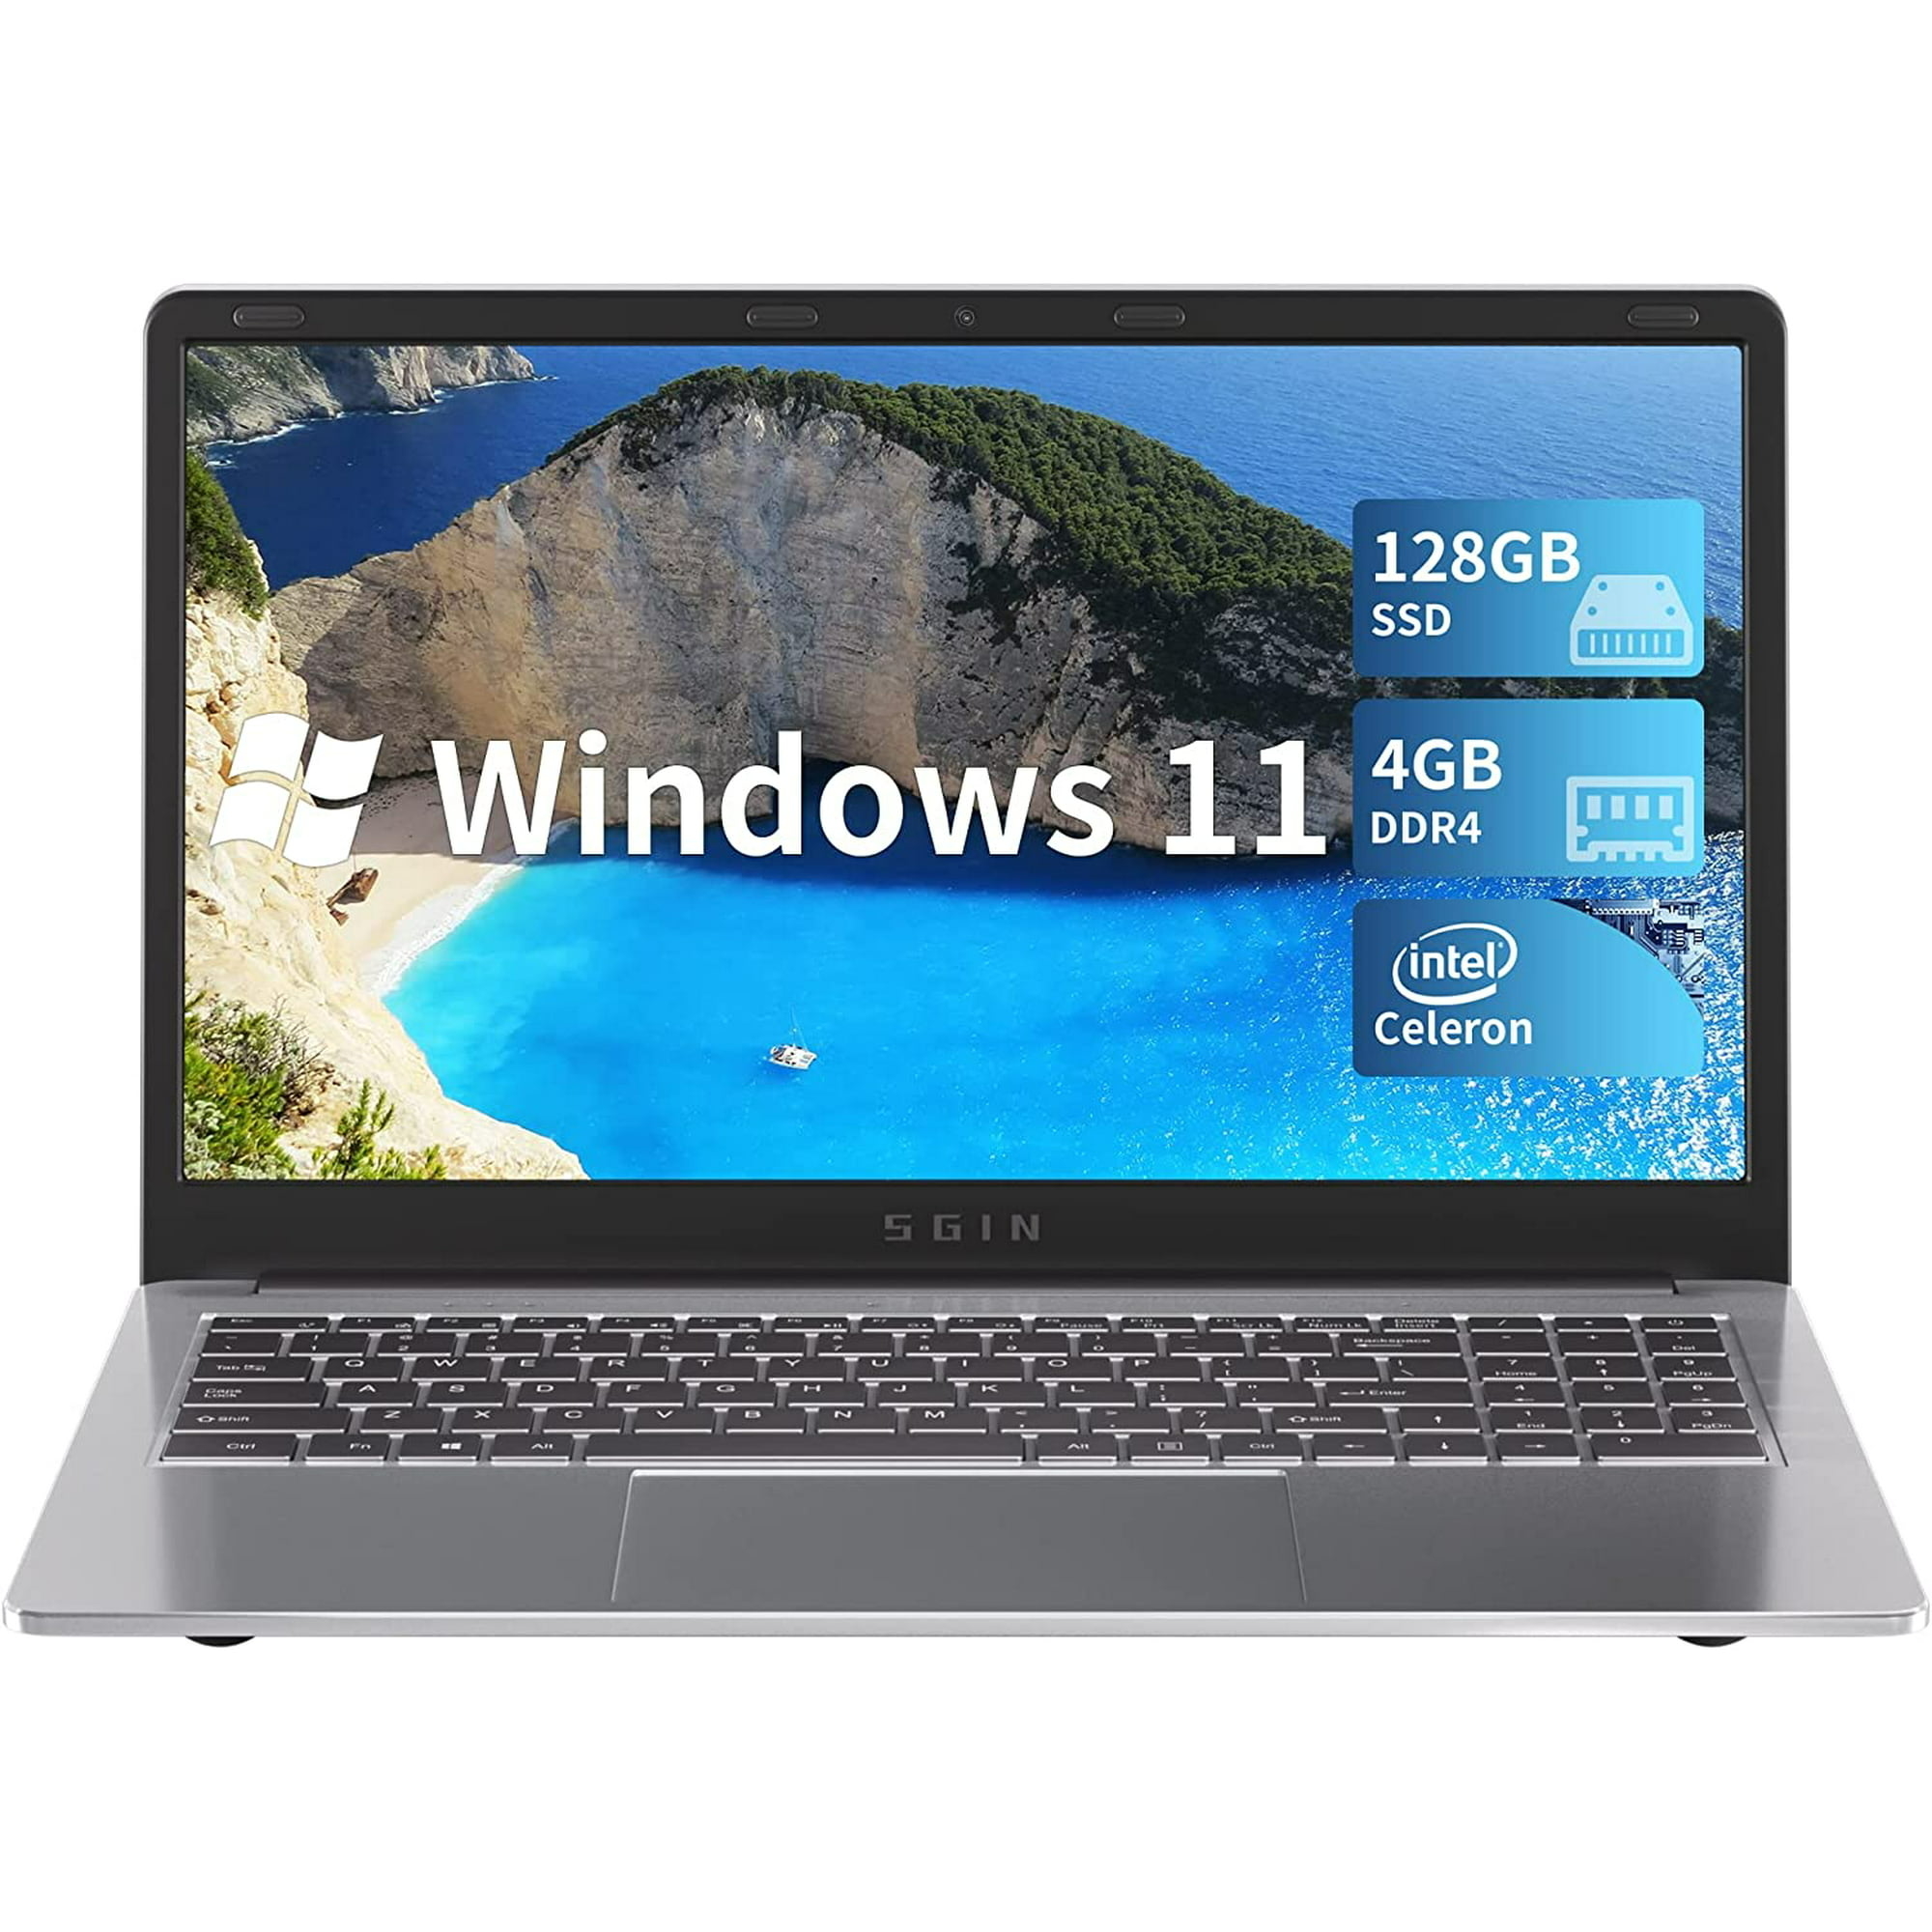 SGIN 15.6 inch Laptop on a white background